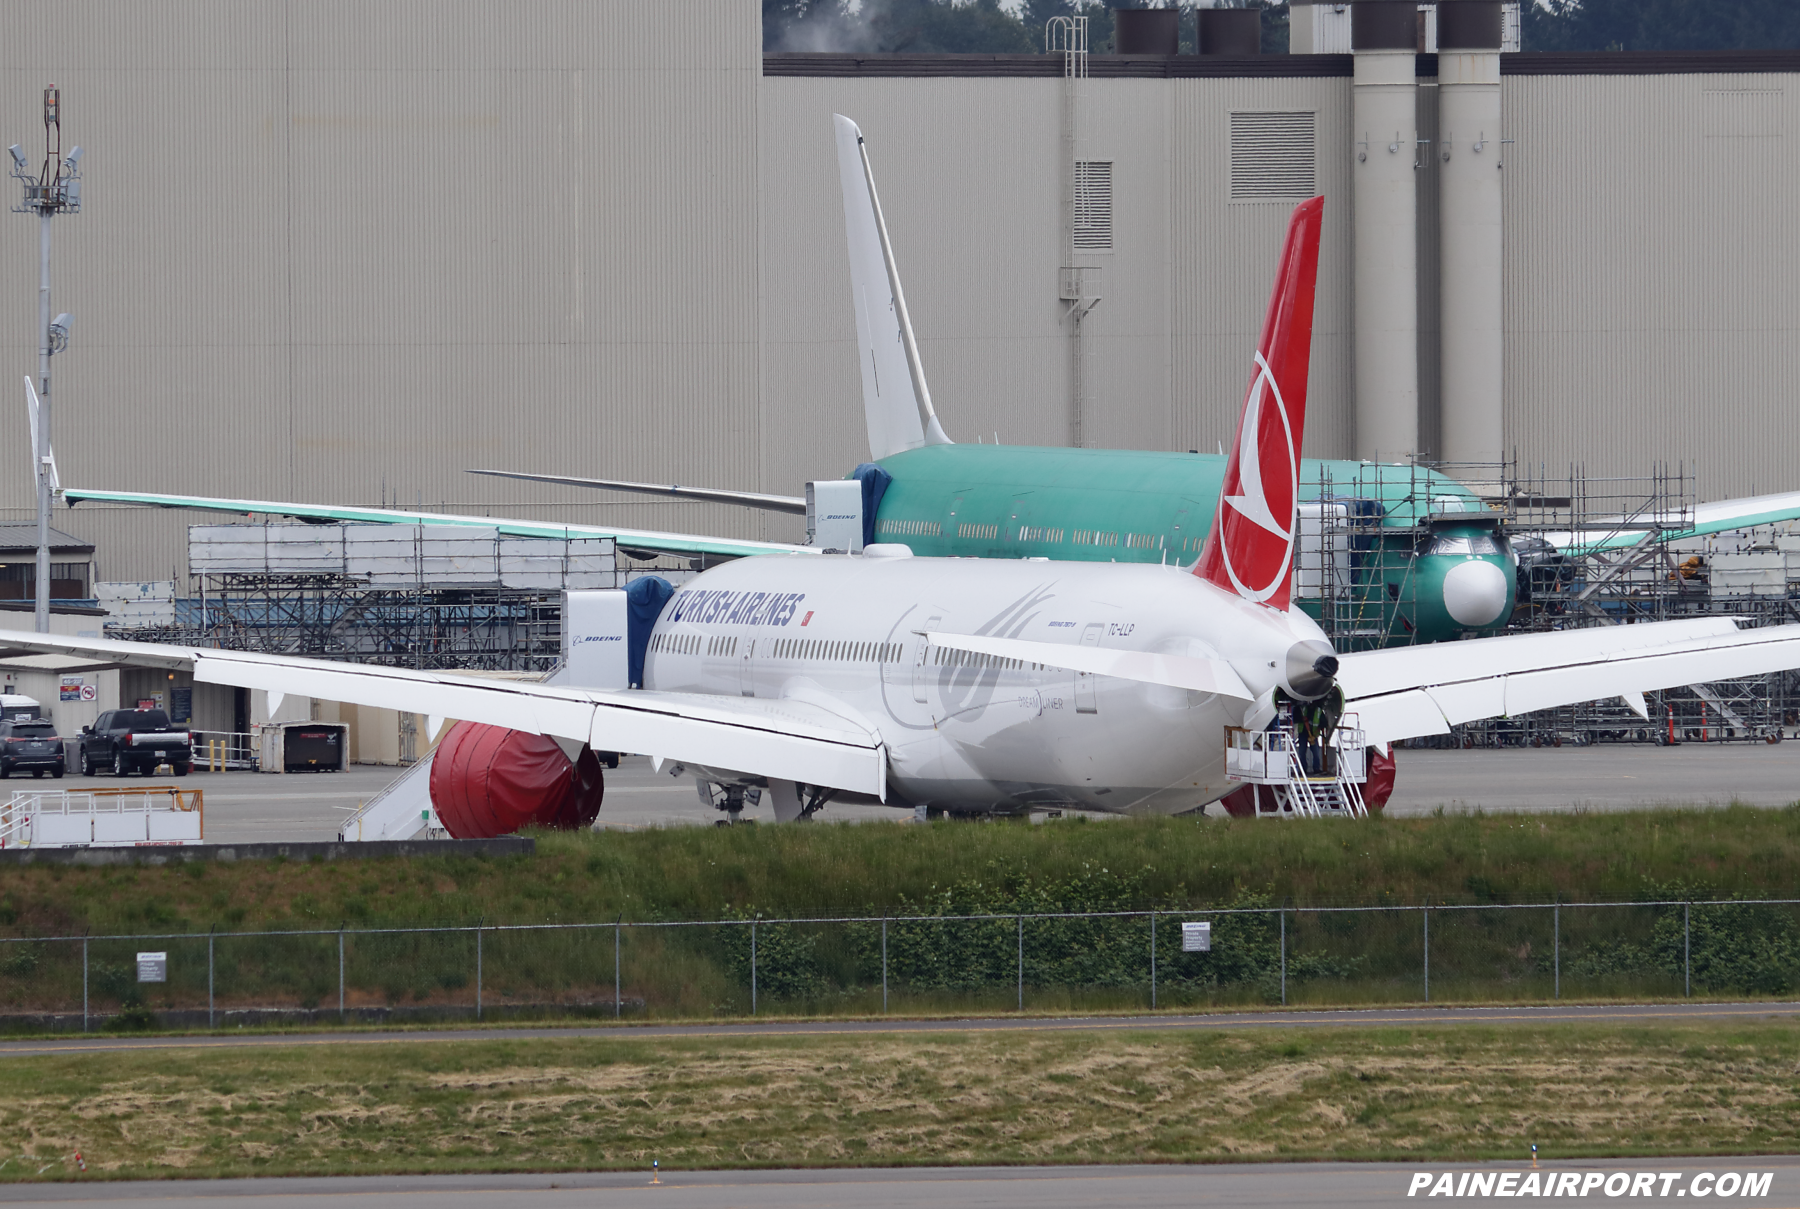 Turkish Airlines 787-9 TC-LLP at KPAE Paine Field